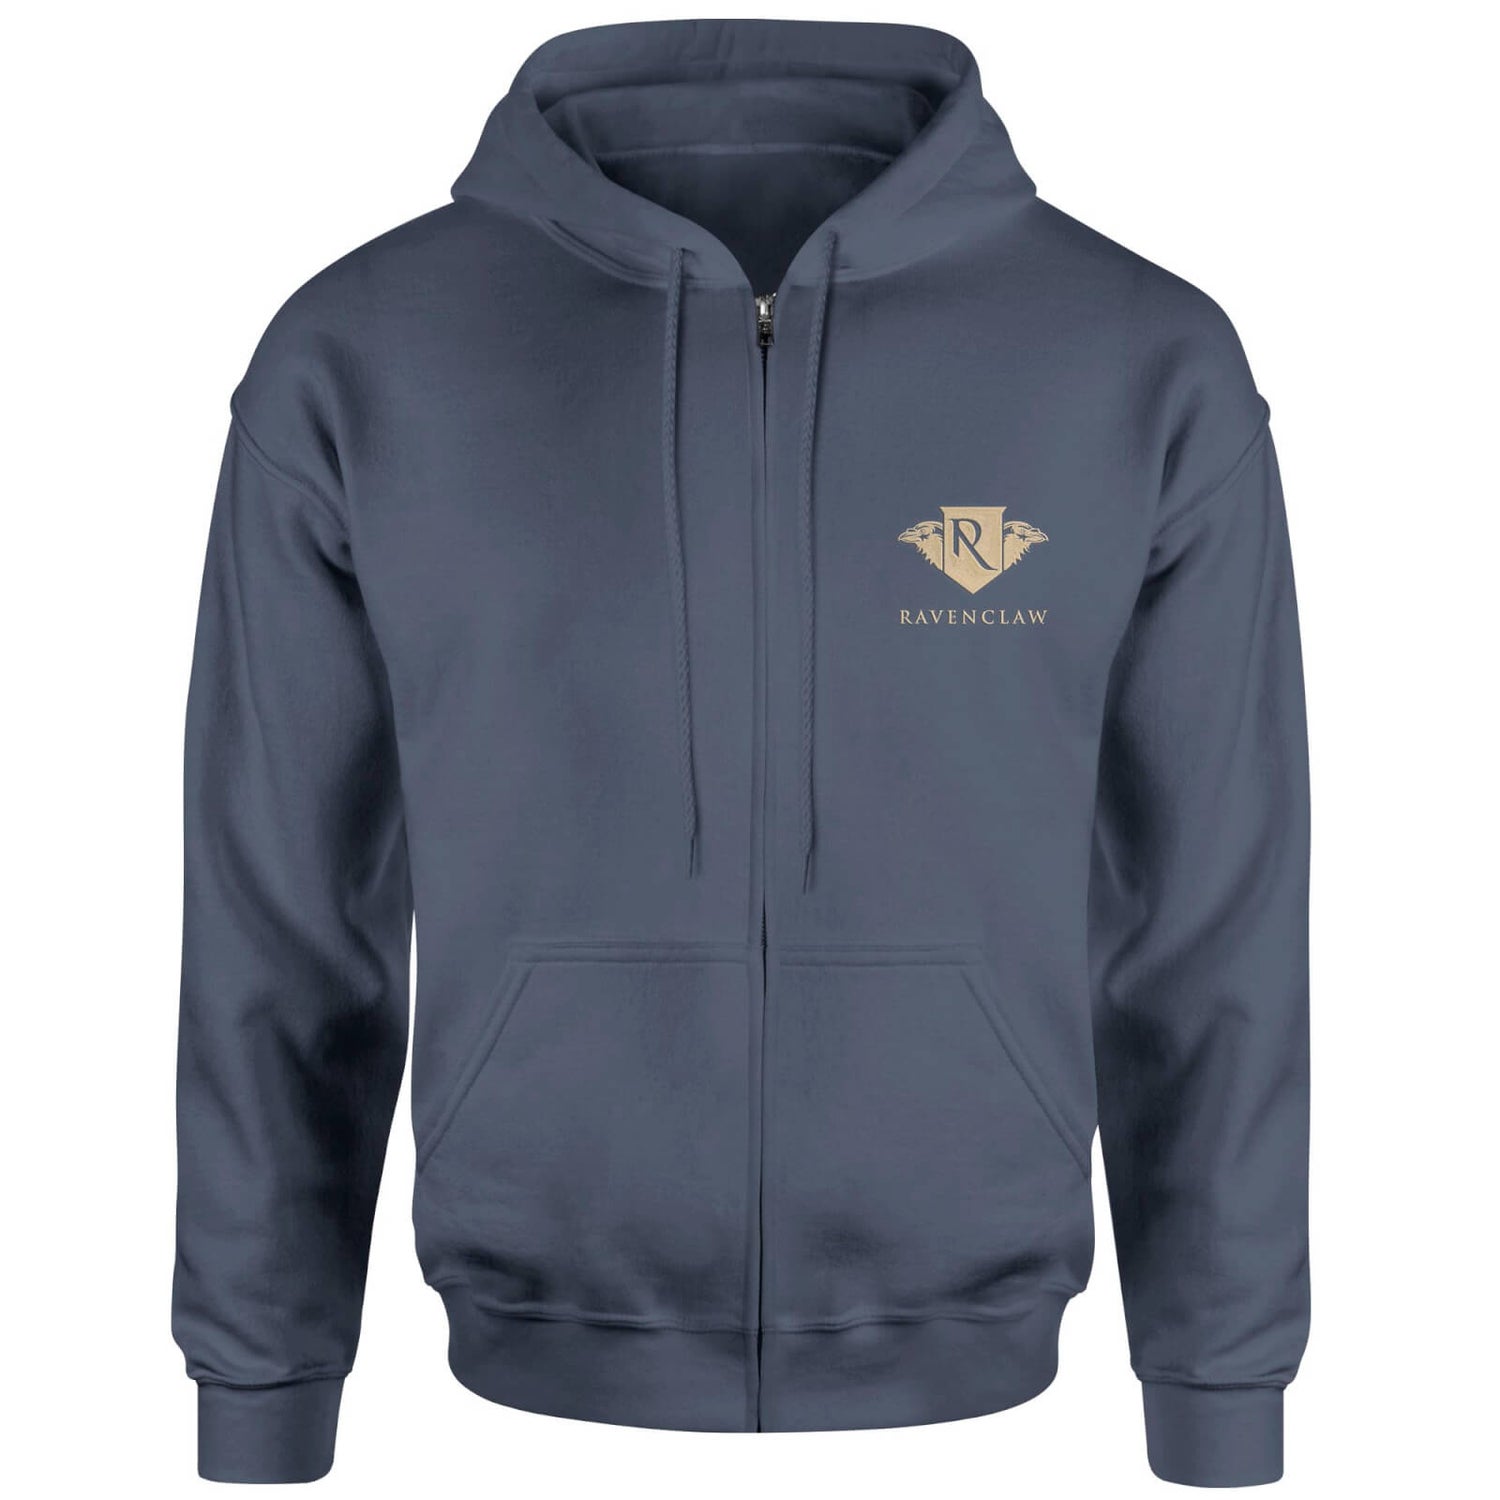 Harry Potter Ravenclaw Embroidered Unisex Zipped Hoodie - Navy